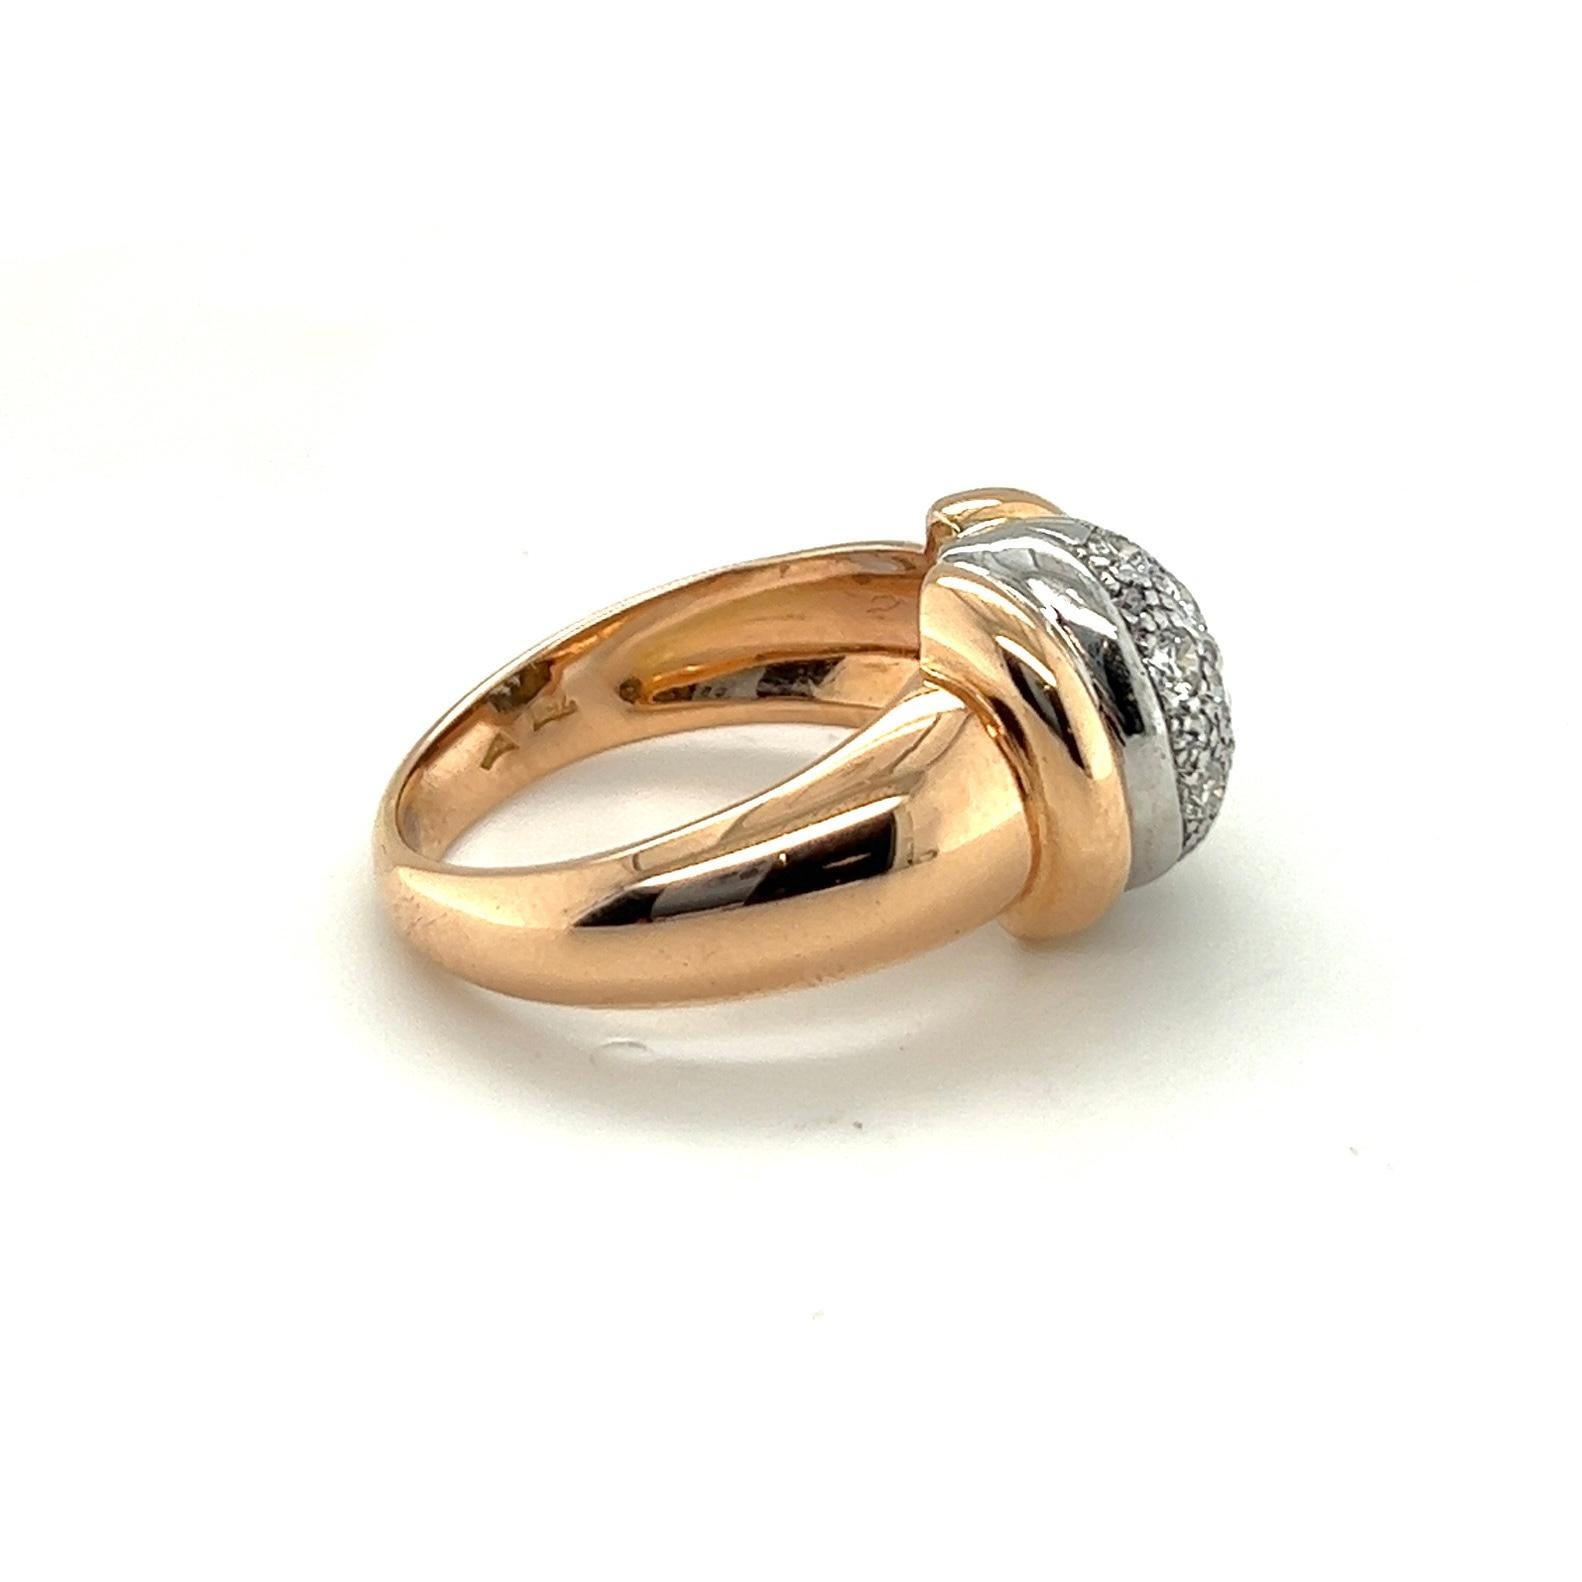 Delightful 18 karat pink and white gold diamond Retro Cocktail ring, circa 1940s. 

Eye-catching pink gold Retro ring, centering upon an elliptical, bombé white gold element, set with 15 circular-cut diamonds totalling circa 0.4 carats, and flanked